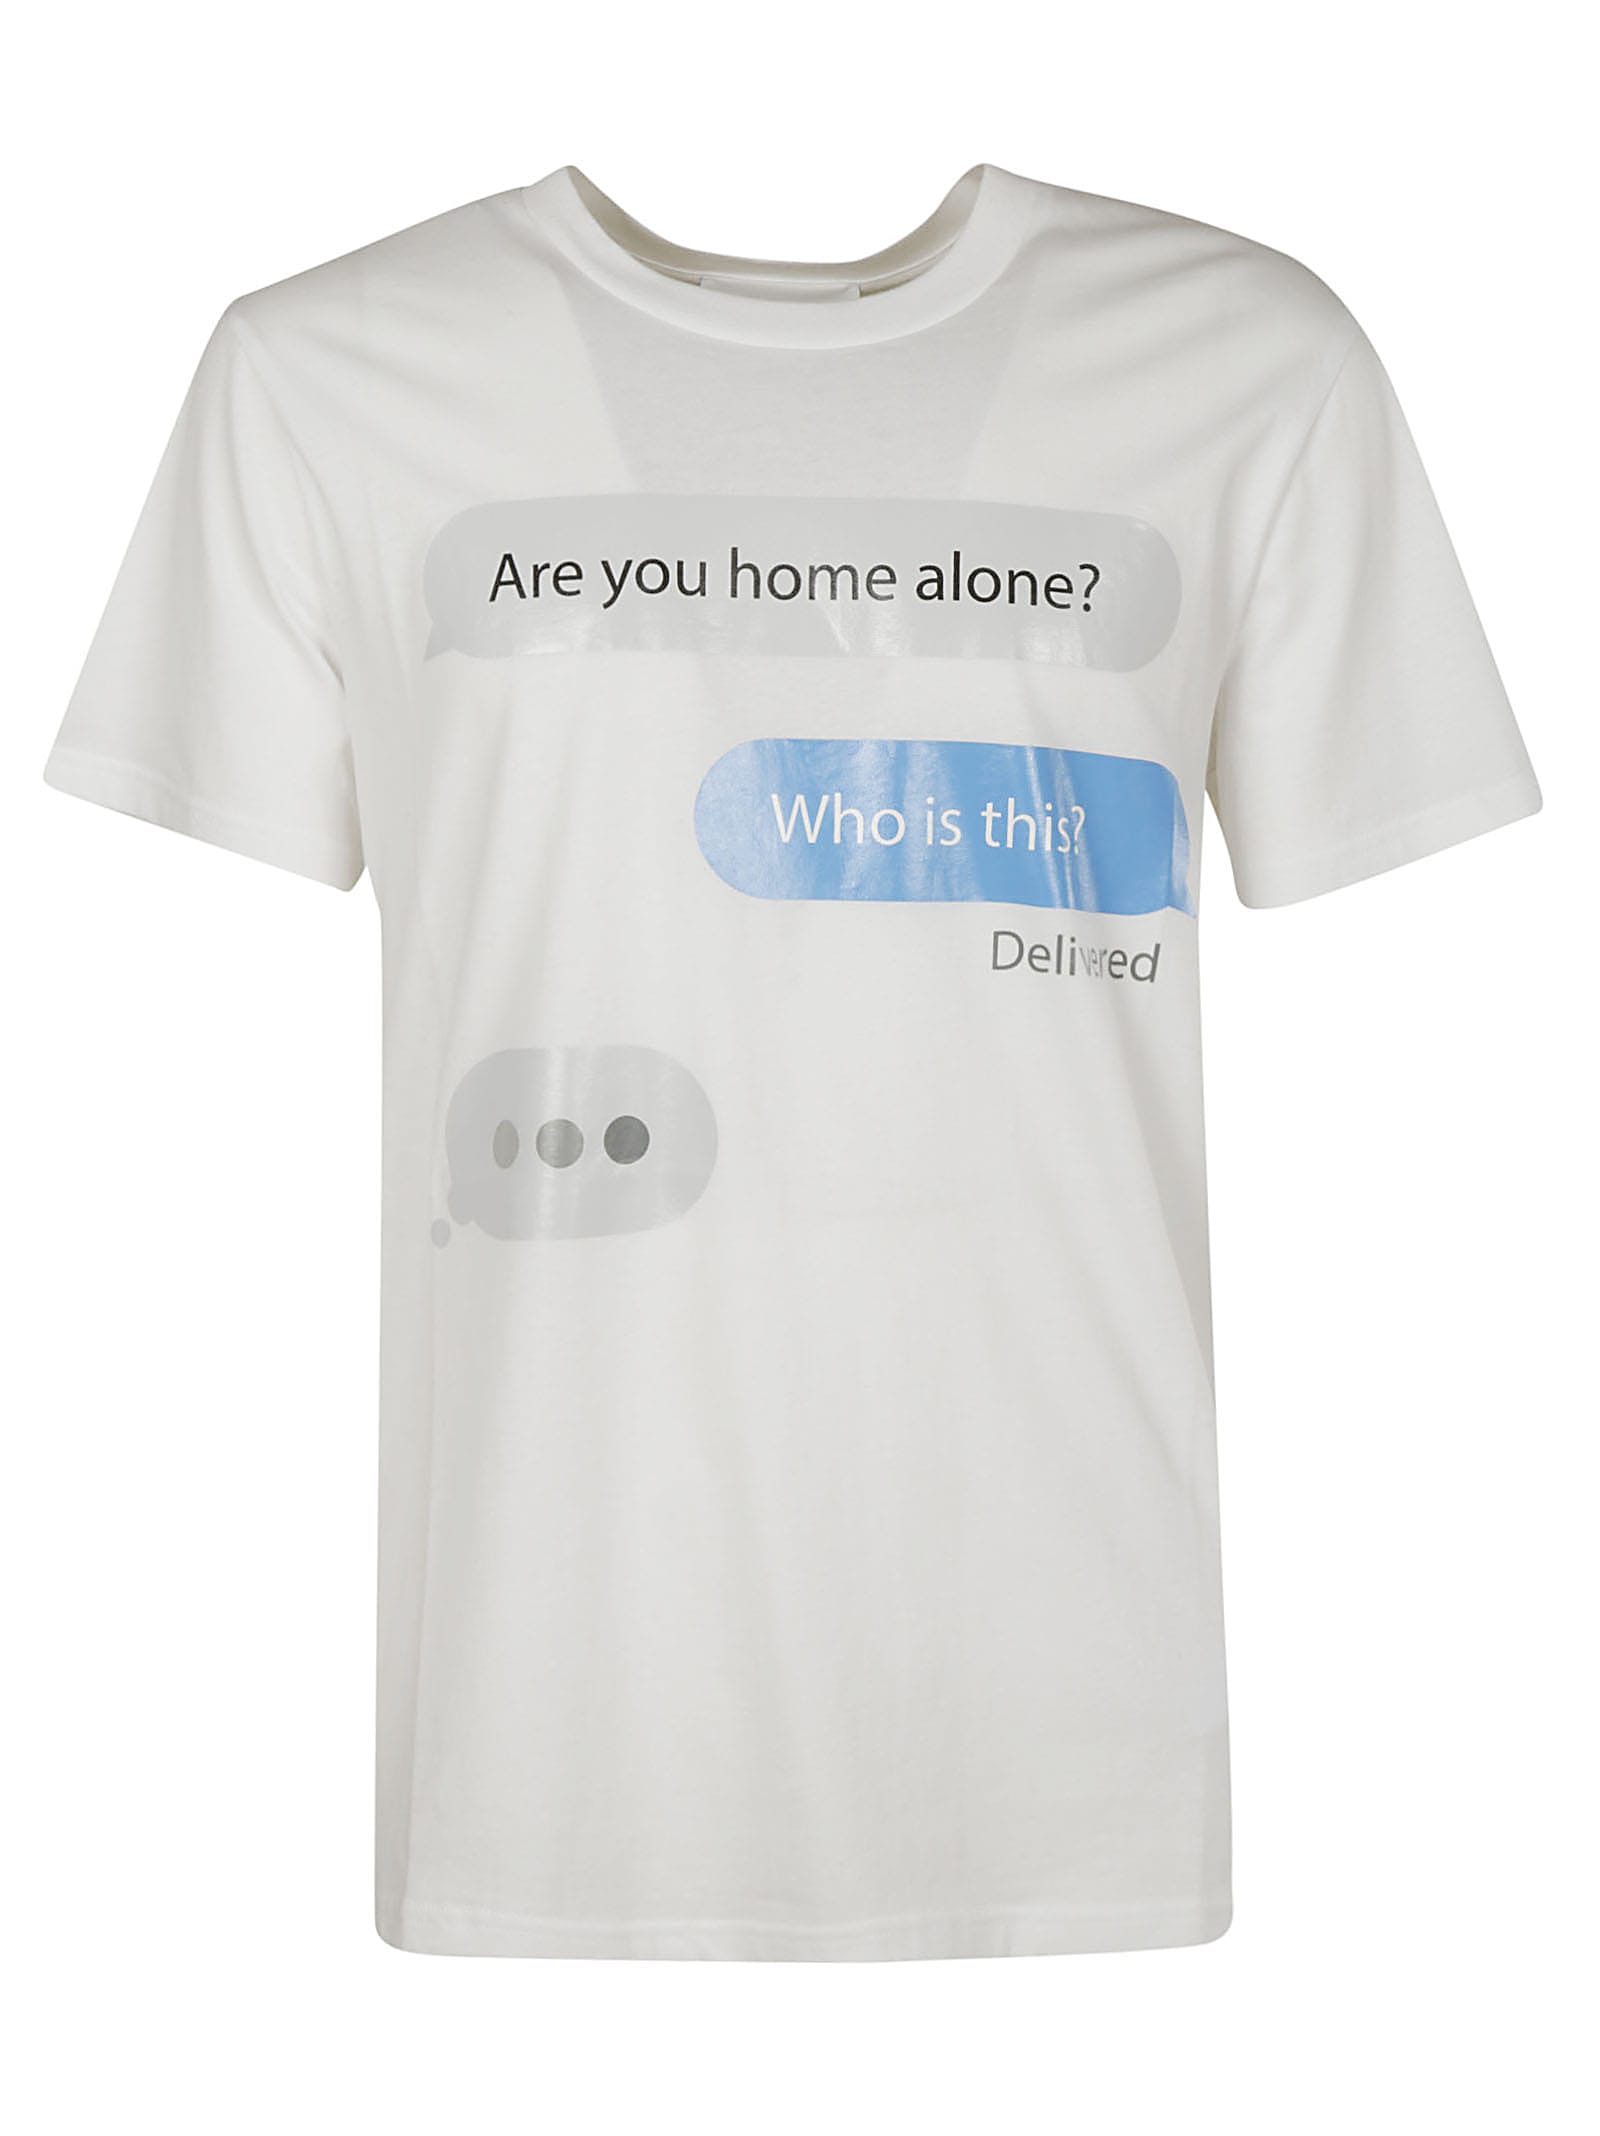 MOSCHINO ARE YOU HOME ALONE? T-SHIRT,11281093